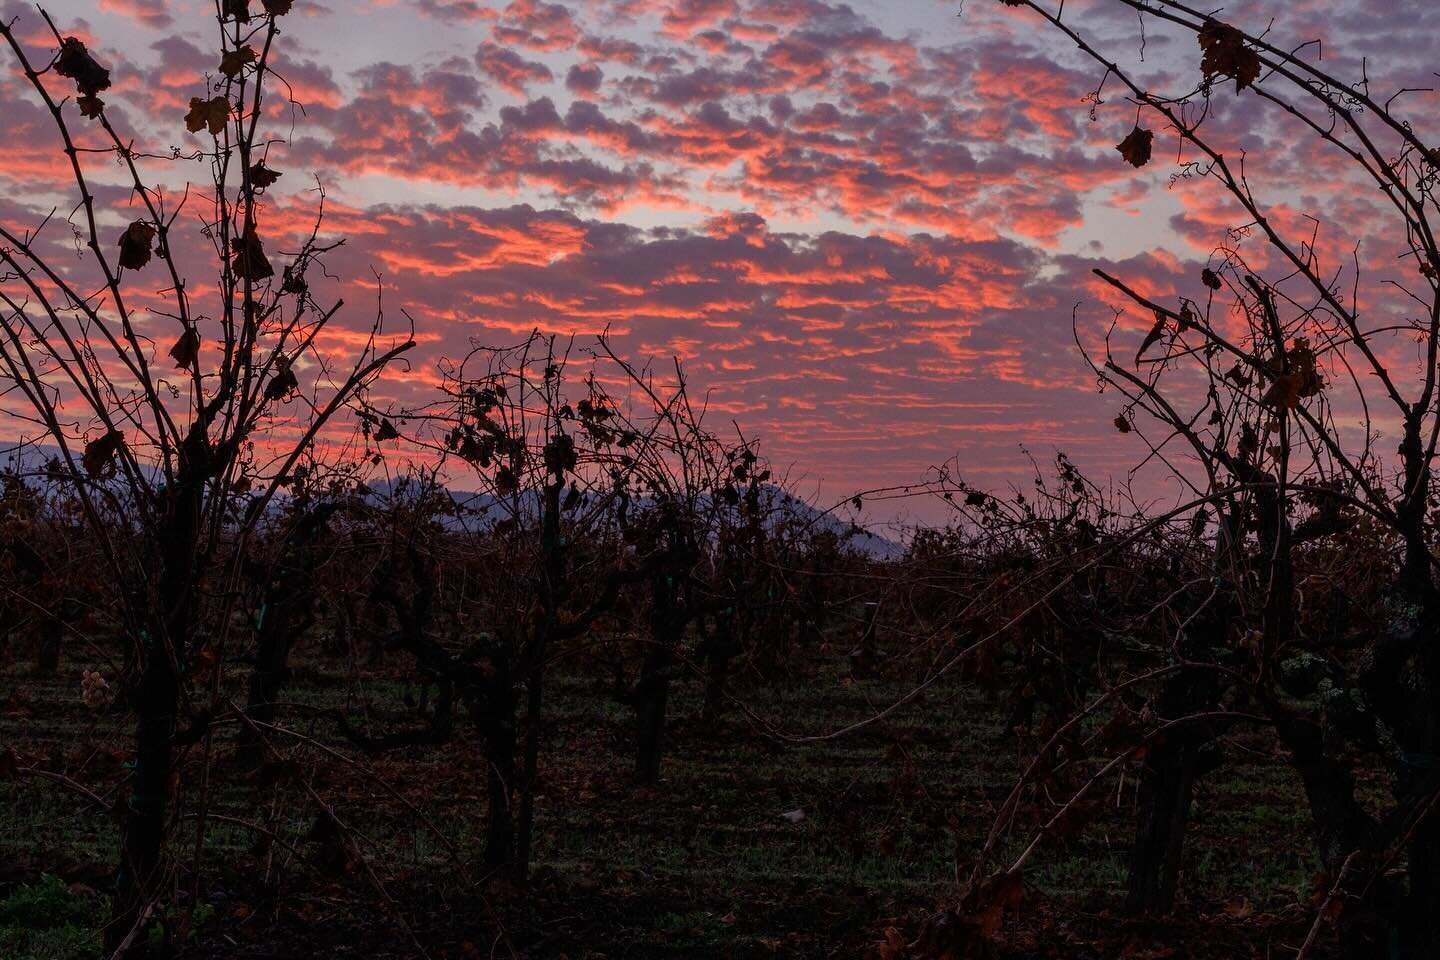 Beautiful sunrise to accompany a pick of noble Semillon, finalizing #harvest2023. Just in time for Christmas! 🍇🎅🏻 

#noblerot #lateharvest #napavalley #yountville #viticulture #vineyard #napawine #winelovers #napaphotographer #canon #r5 #canonphot